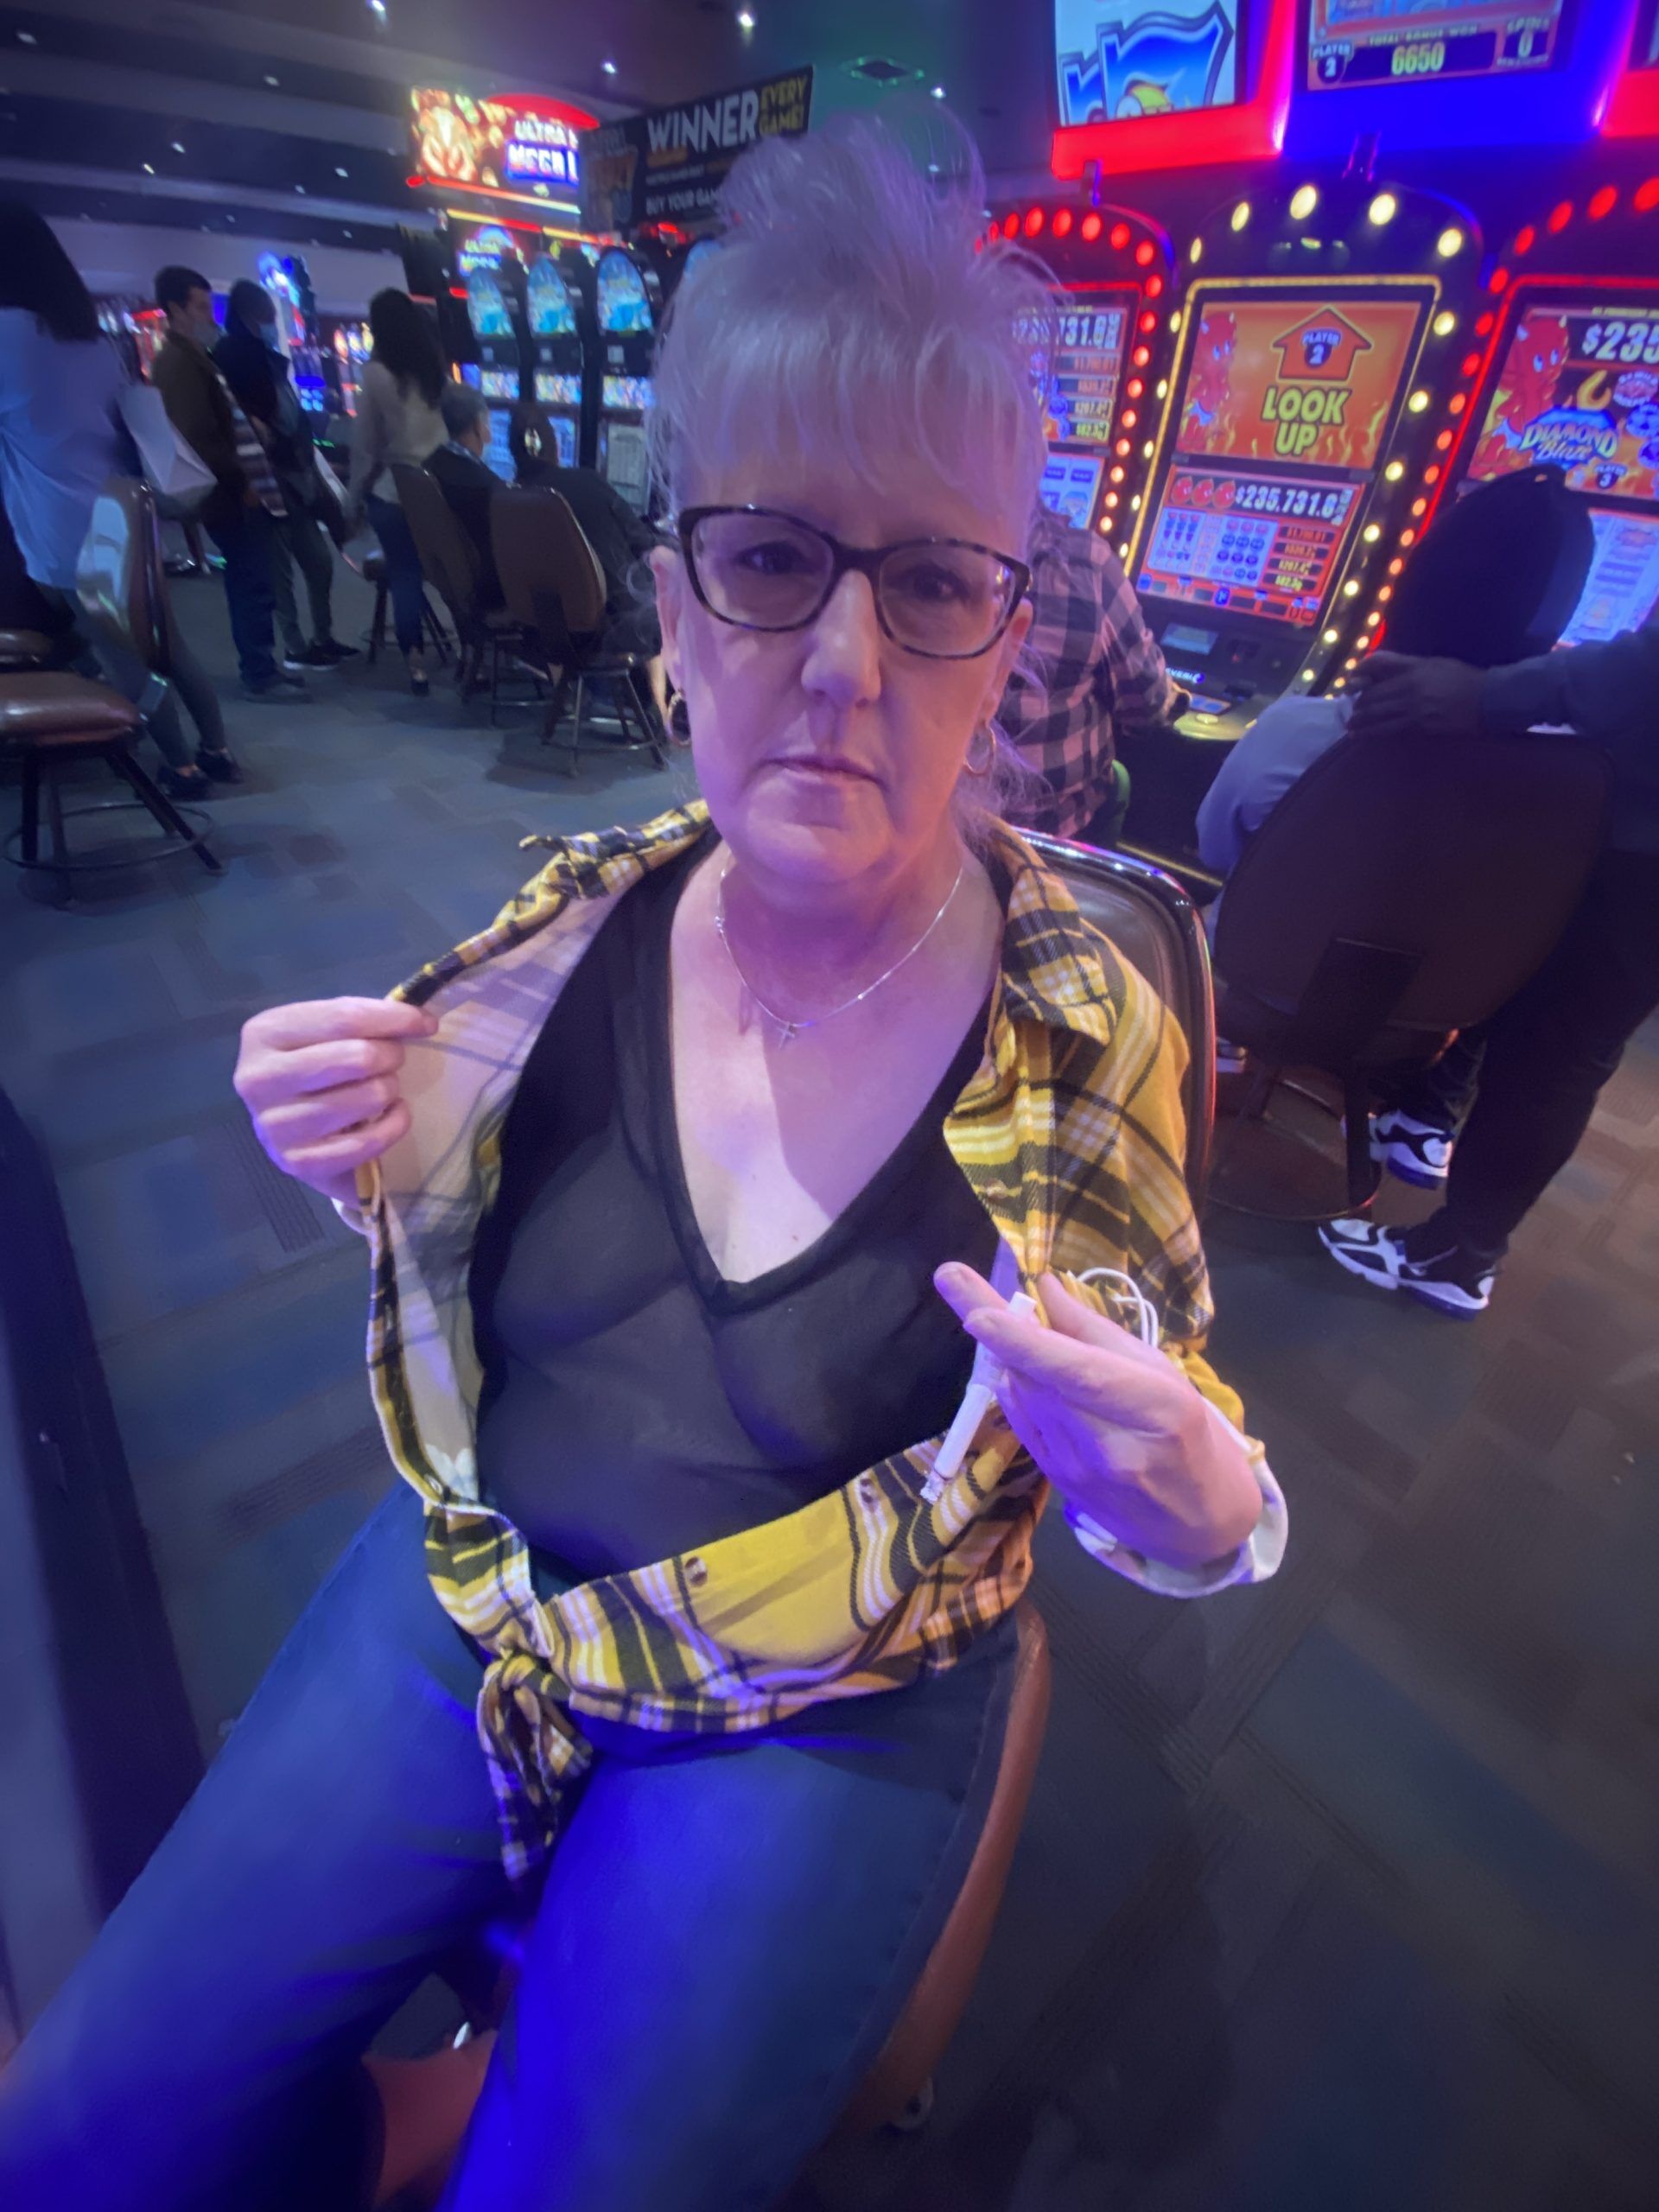 Granny Tits Up Blouse - Granny in See-through Blouse Flashing at Casino Boobs Flash Pics, Hotwife  Pics, Mature Flashing Pics, Public Flashing Pics, Real Amateurs from  Google, Tumblr, Pinterest, Facebook, Twitter, Instagram and Snapchat.